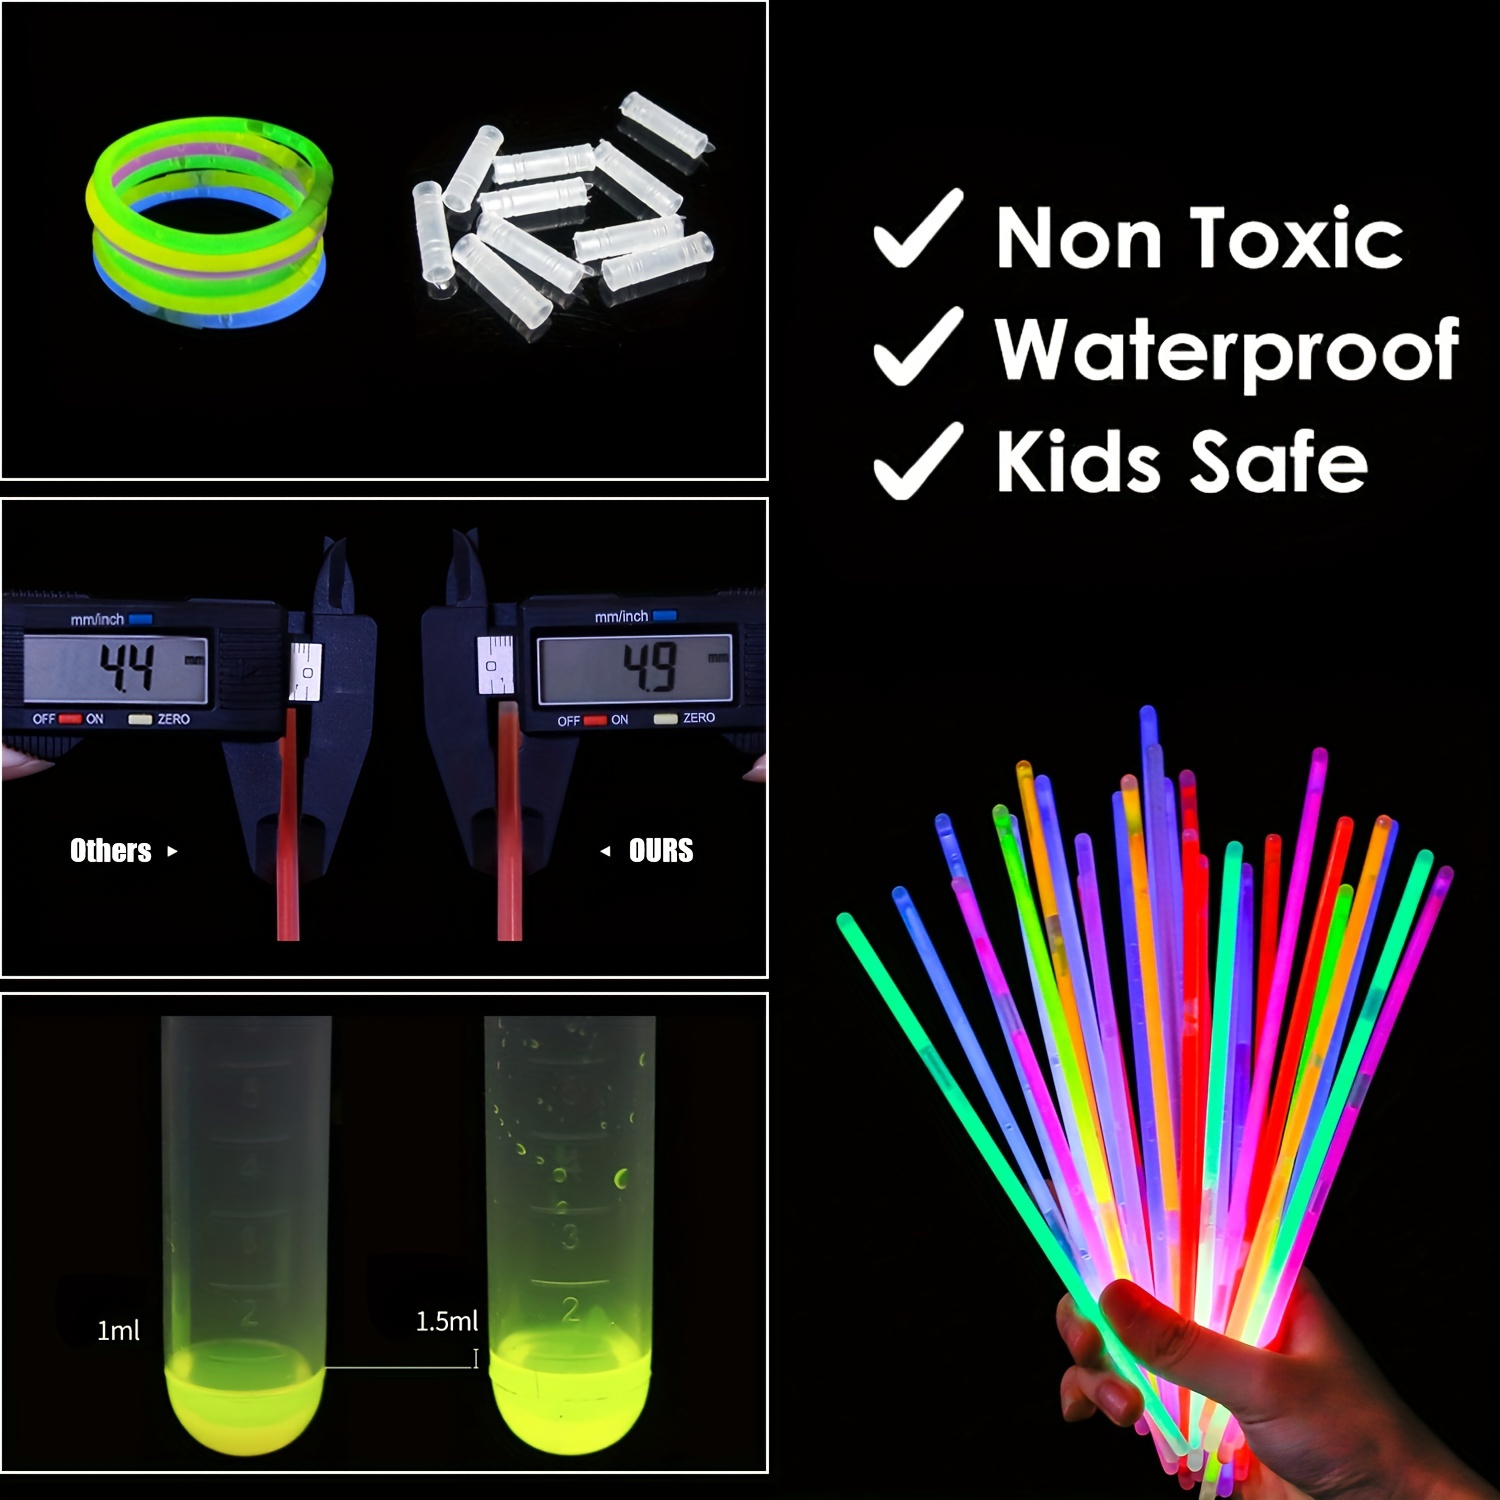 Cheap 100 Pack Glow Stick Glow In the Dark Party Supplies for Kids